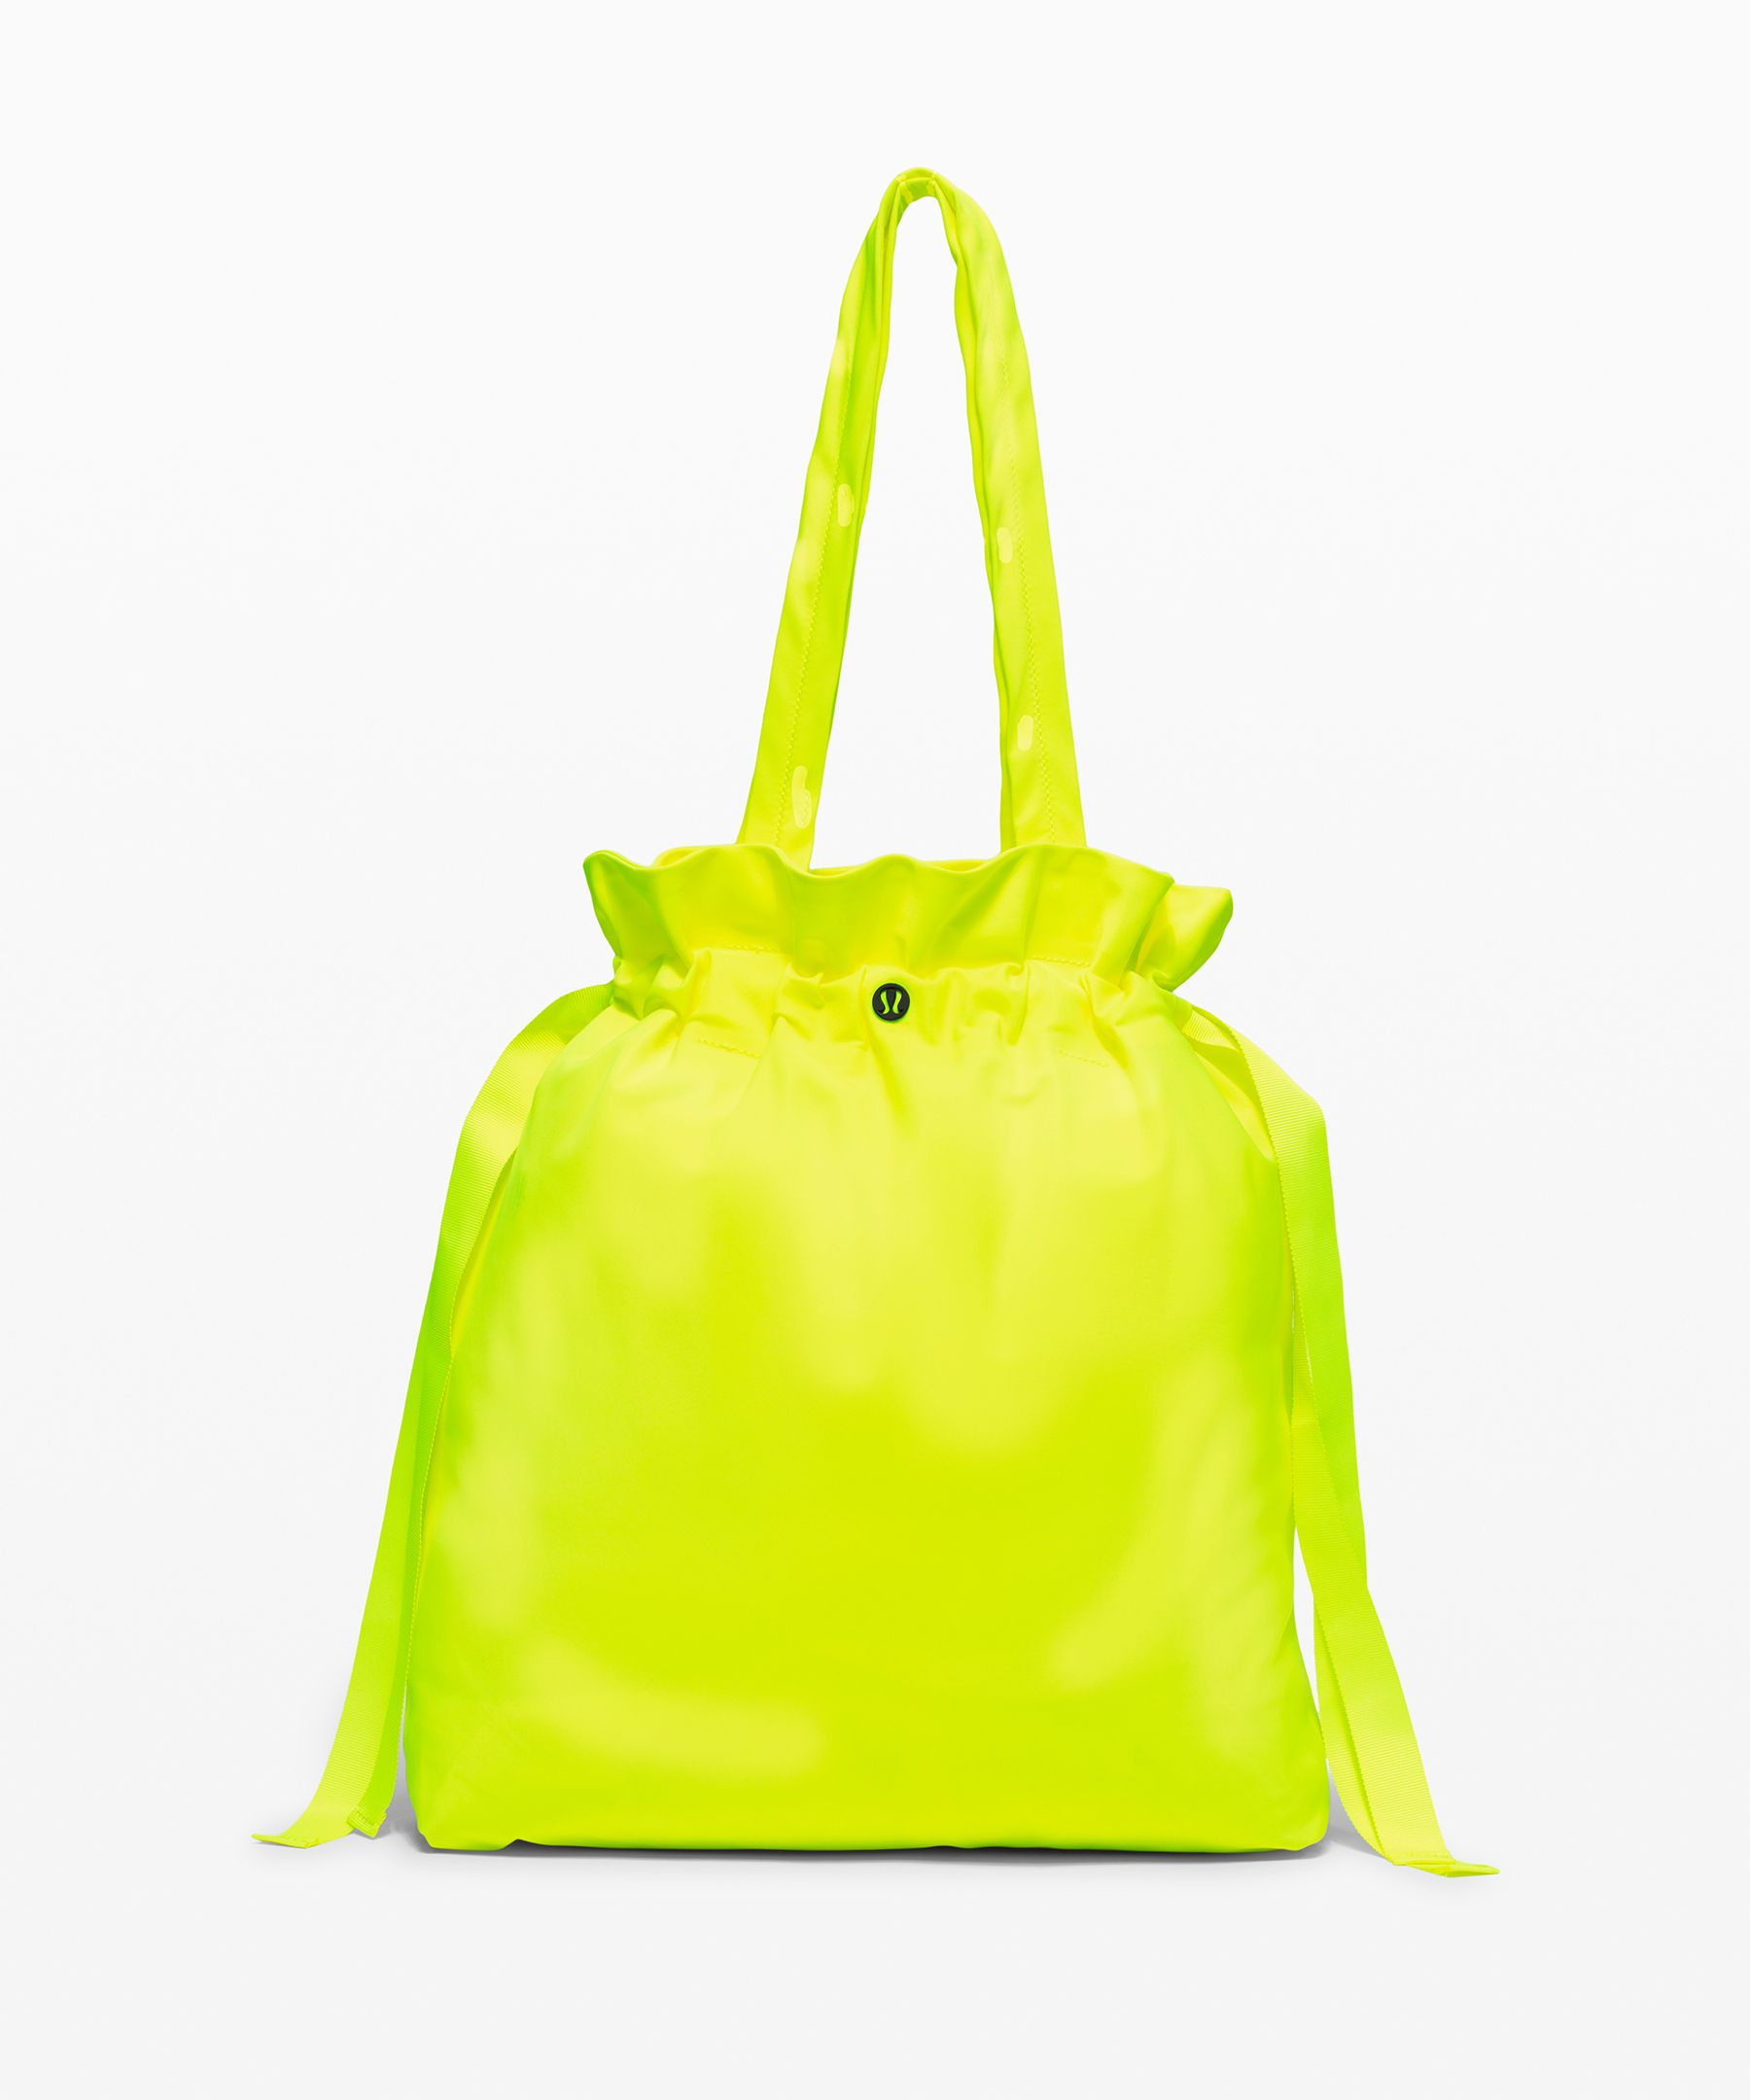 Lululemon Easy As Sunday Tote In Yellow